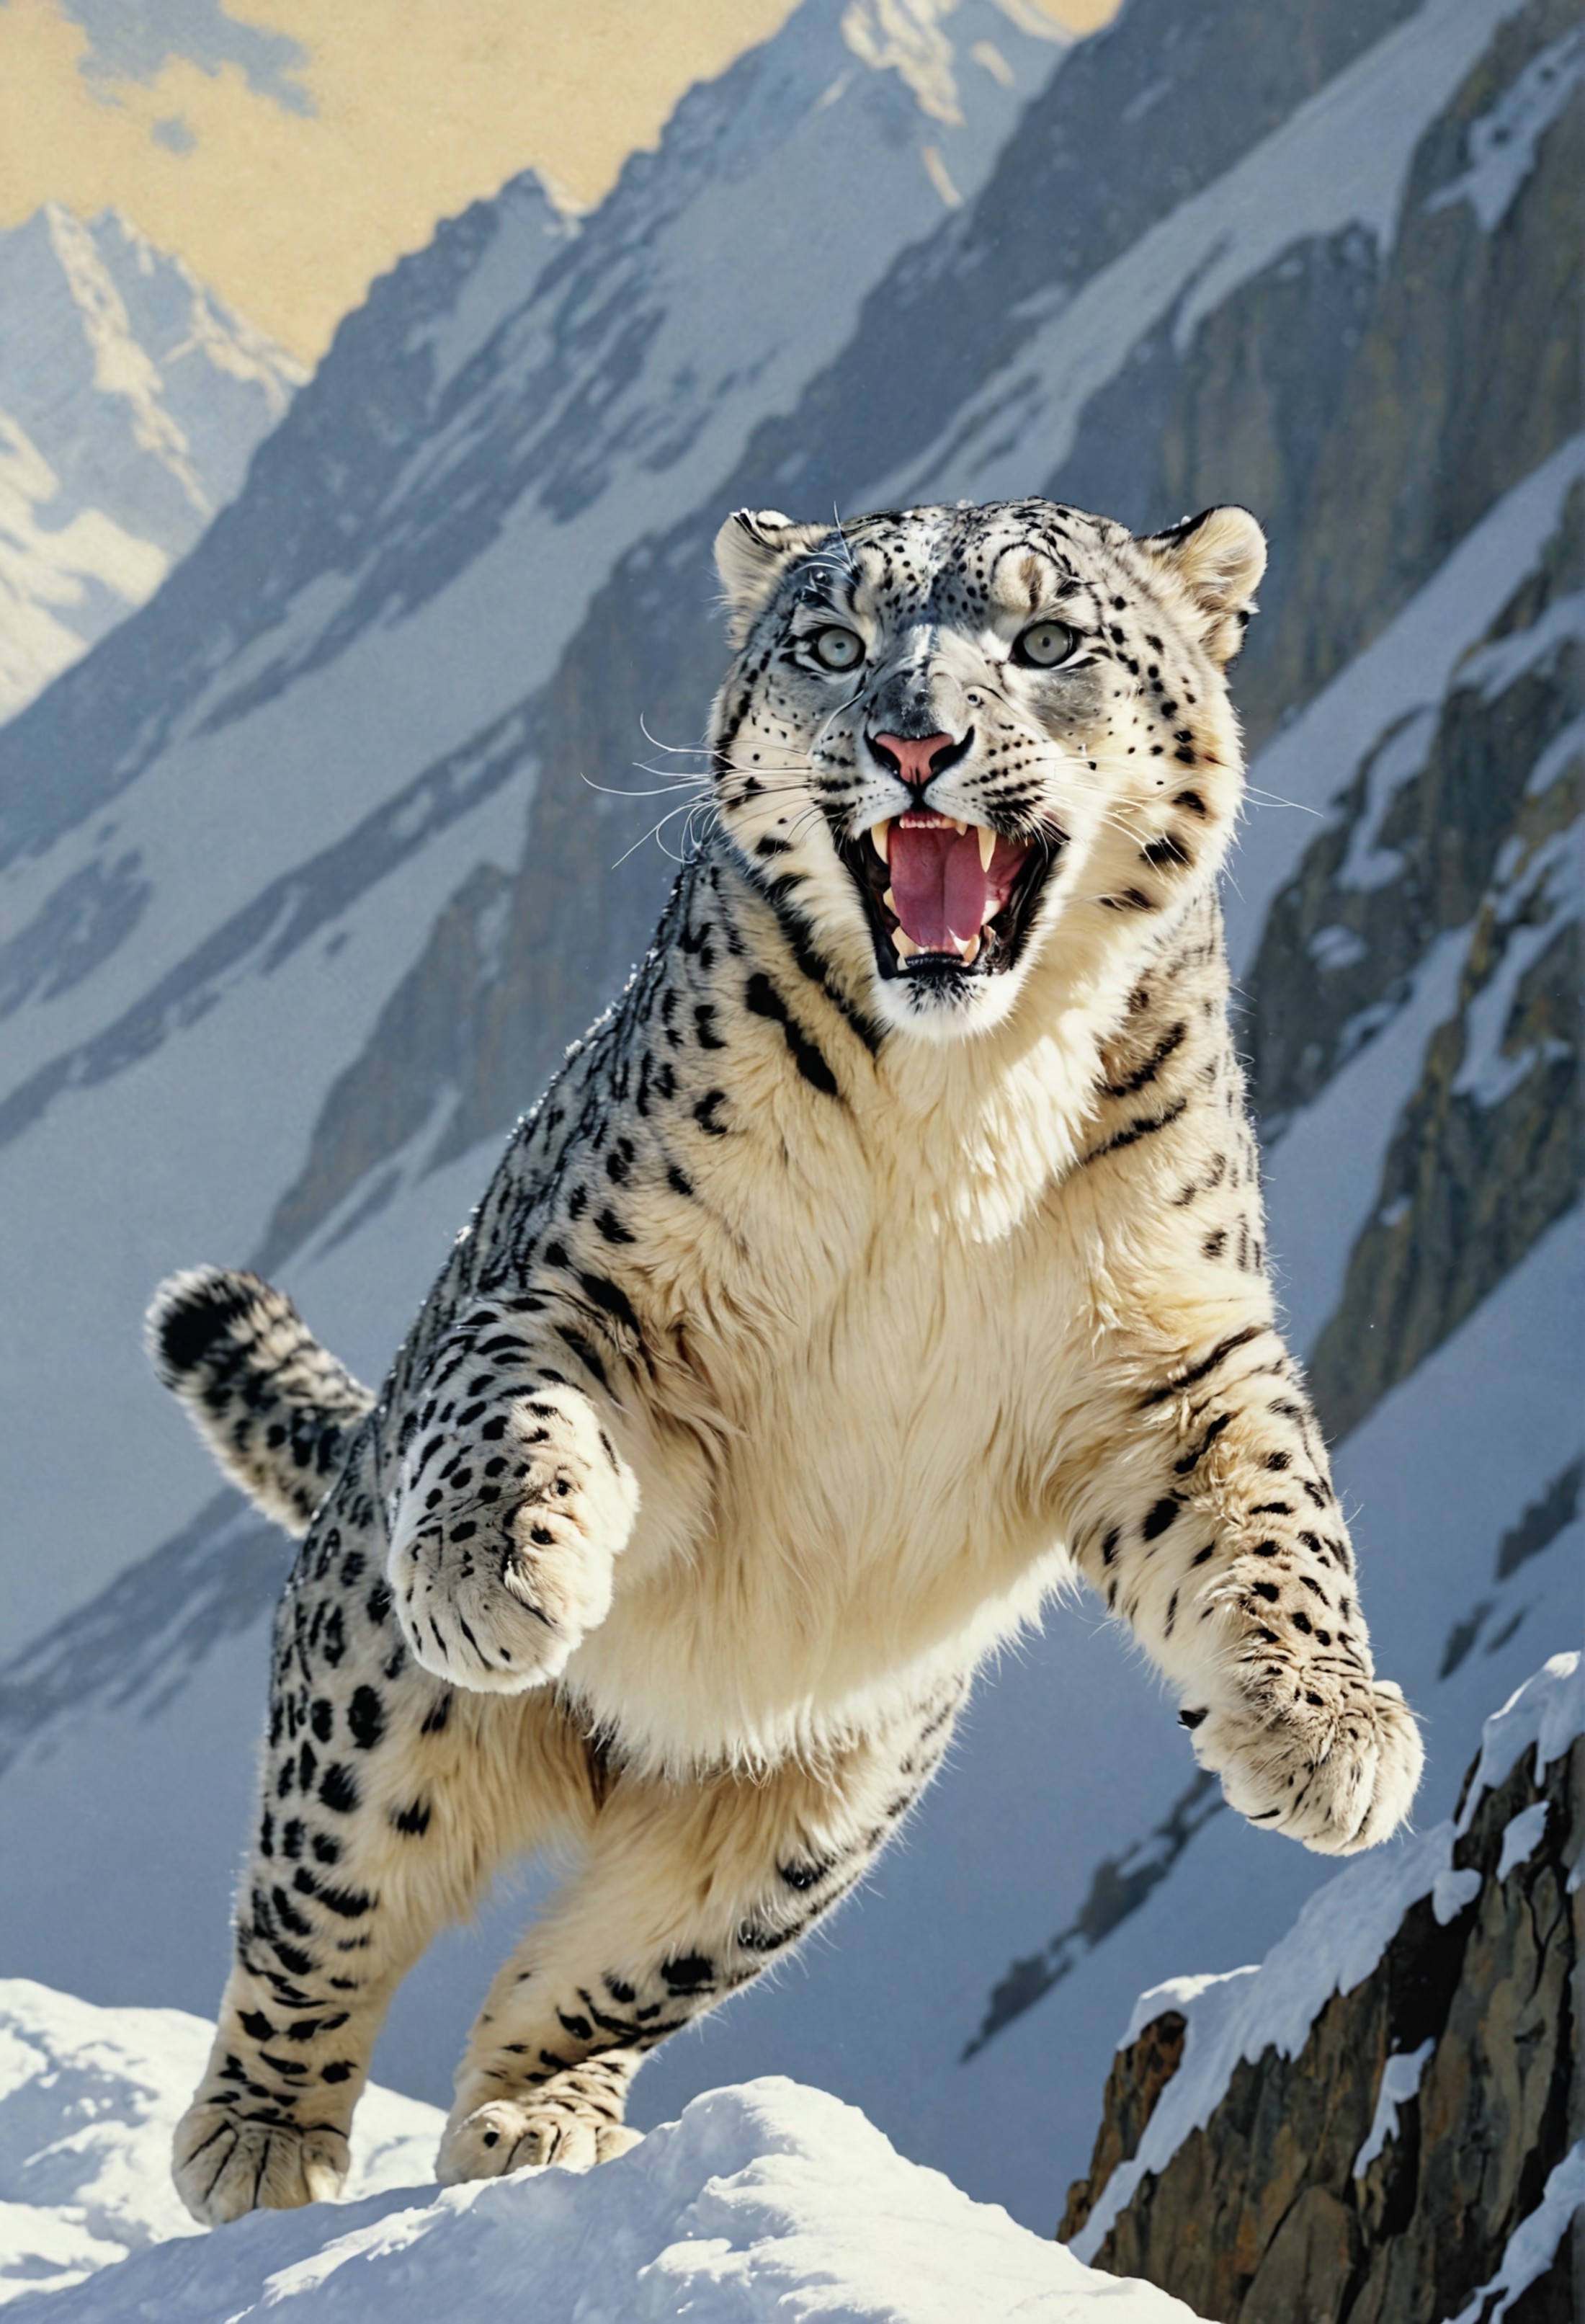 Majestic wildlife illustration, a snow leopard in mid-air leap, capturing the moment of power and grace, stunning fur text...